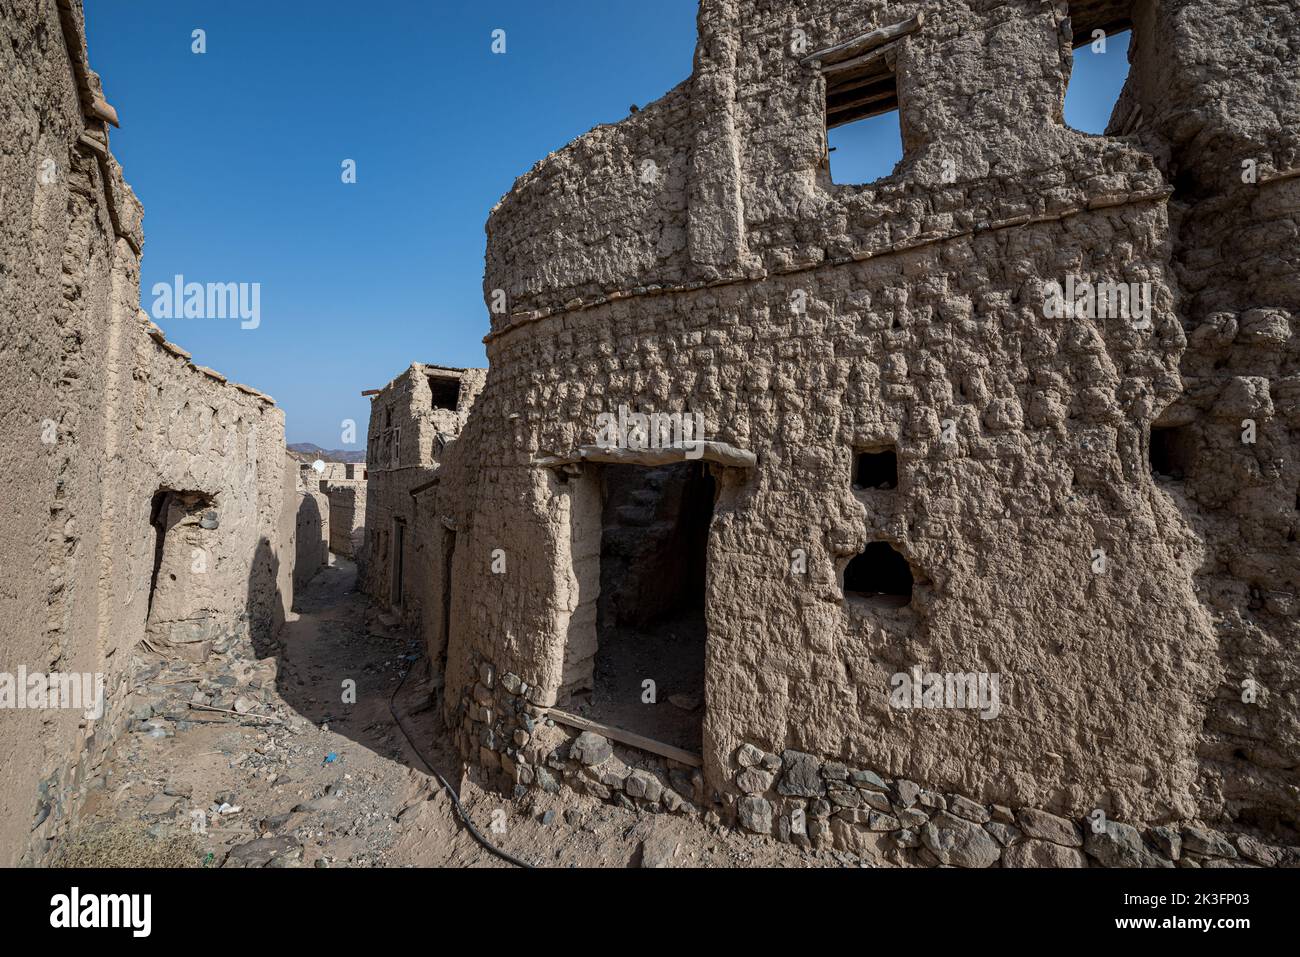 Mud-brick Bahla Fort Citadel and oasis on decay, Oman Stock Photo